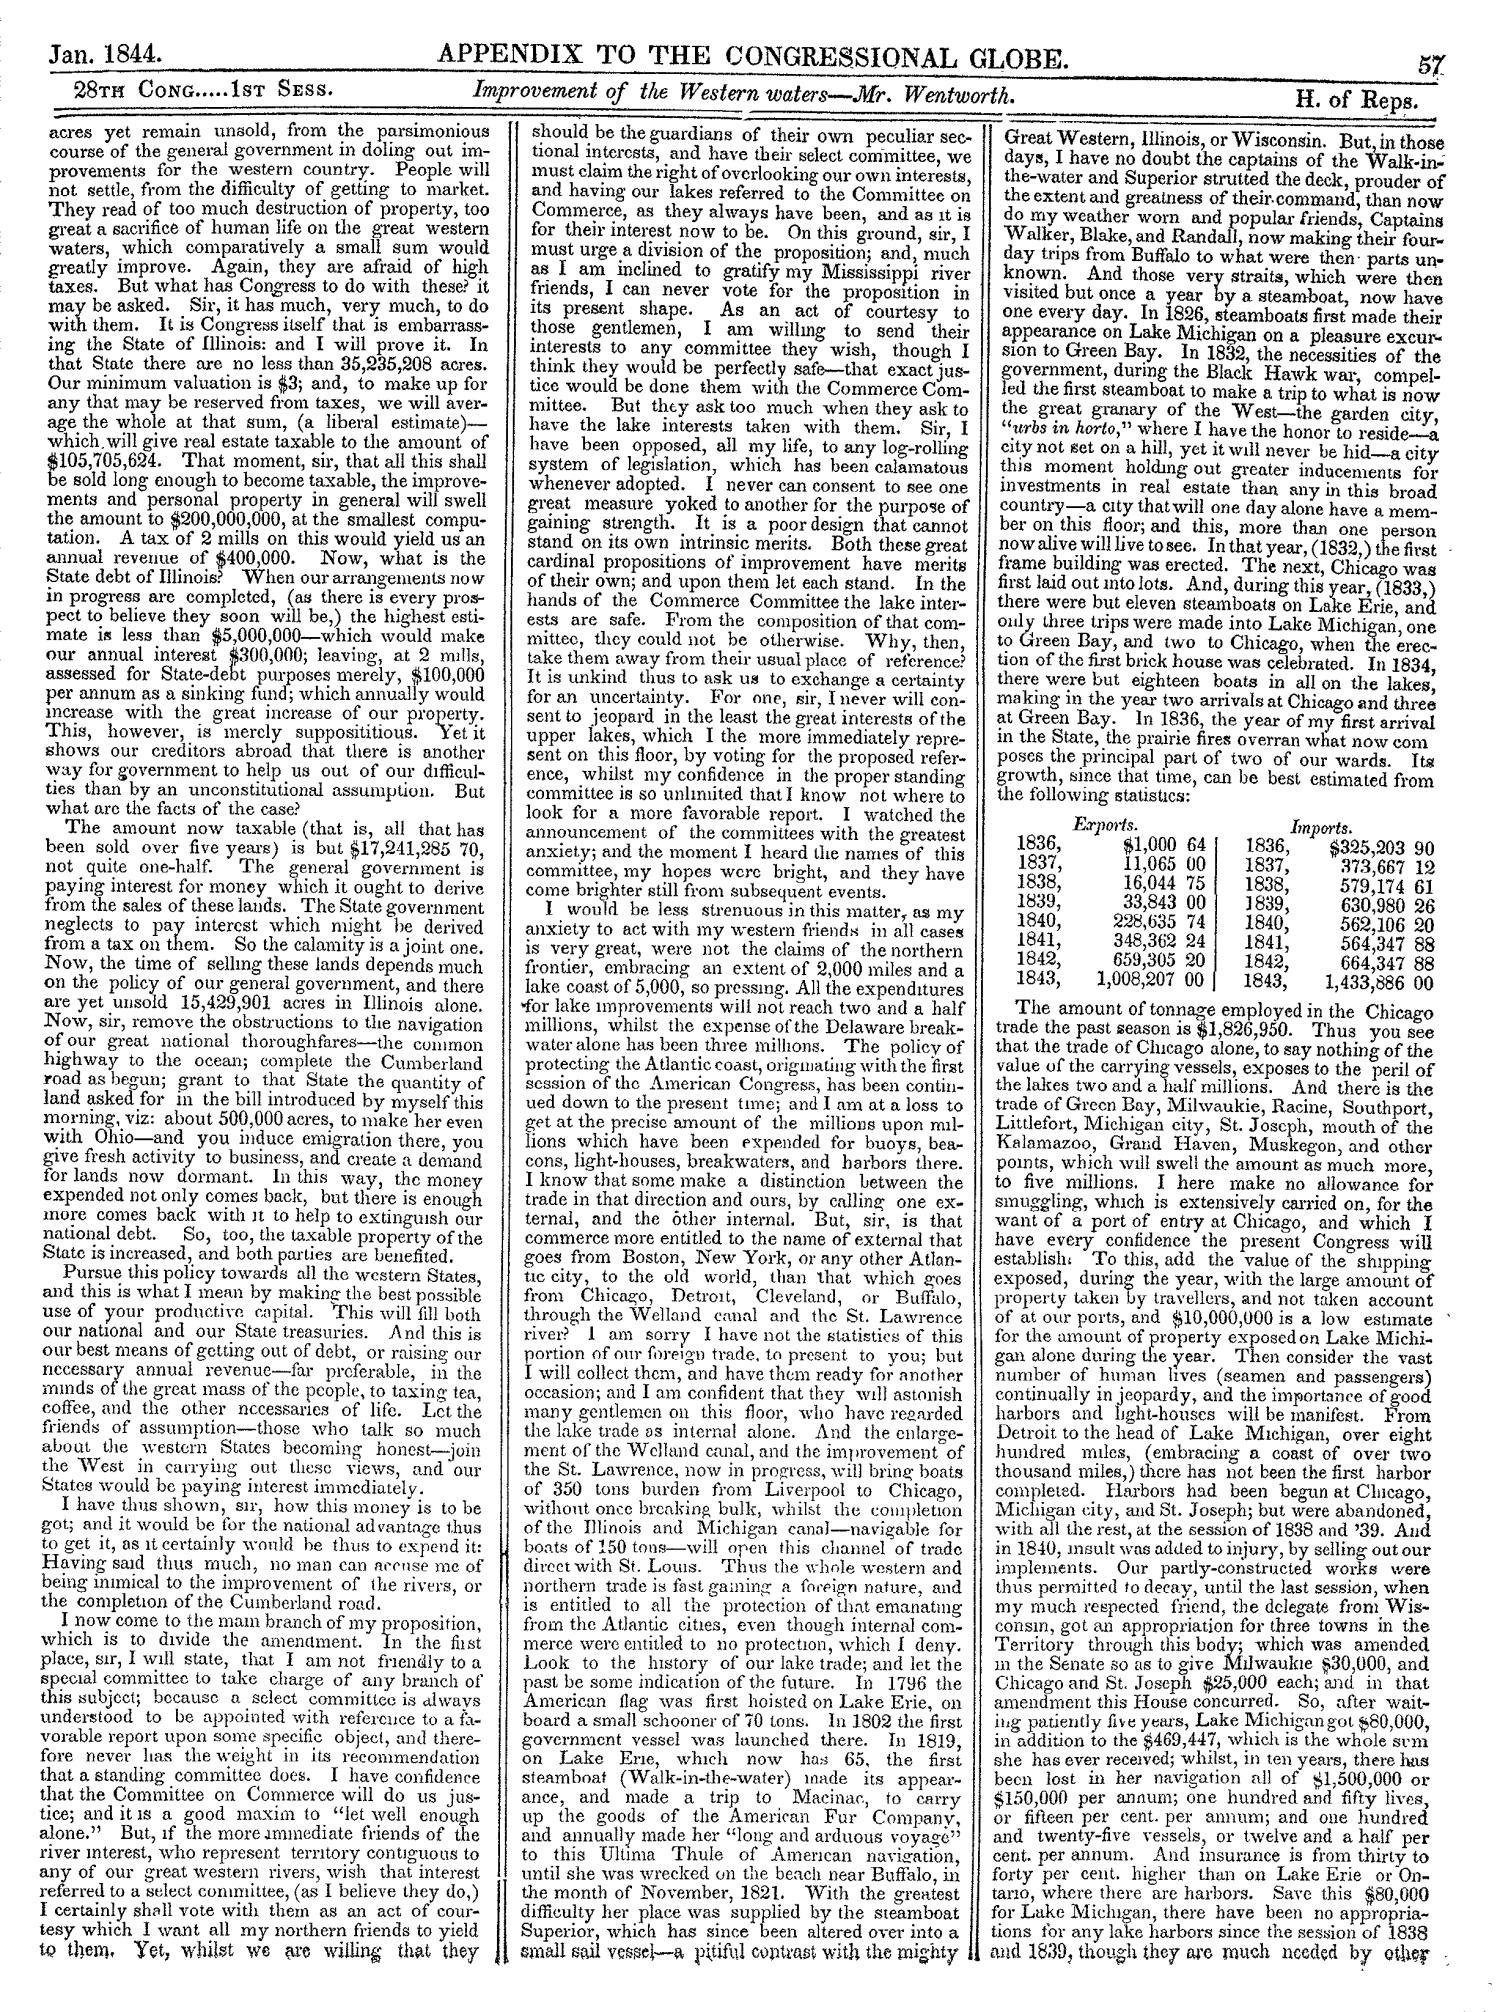 The Congressional Globe, Volume 13, Part 2: Twenty-Eighth Congress, First Session
                                                
                                                    57
                                                